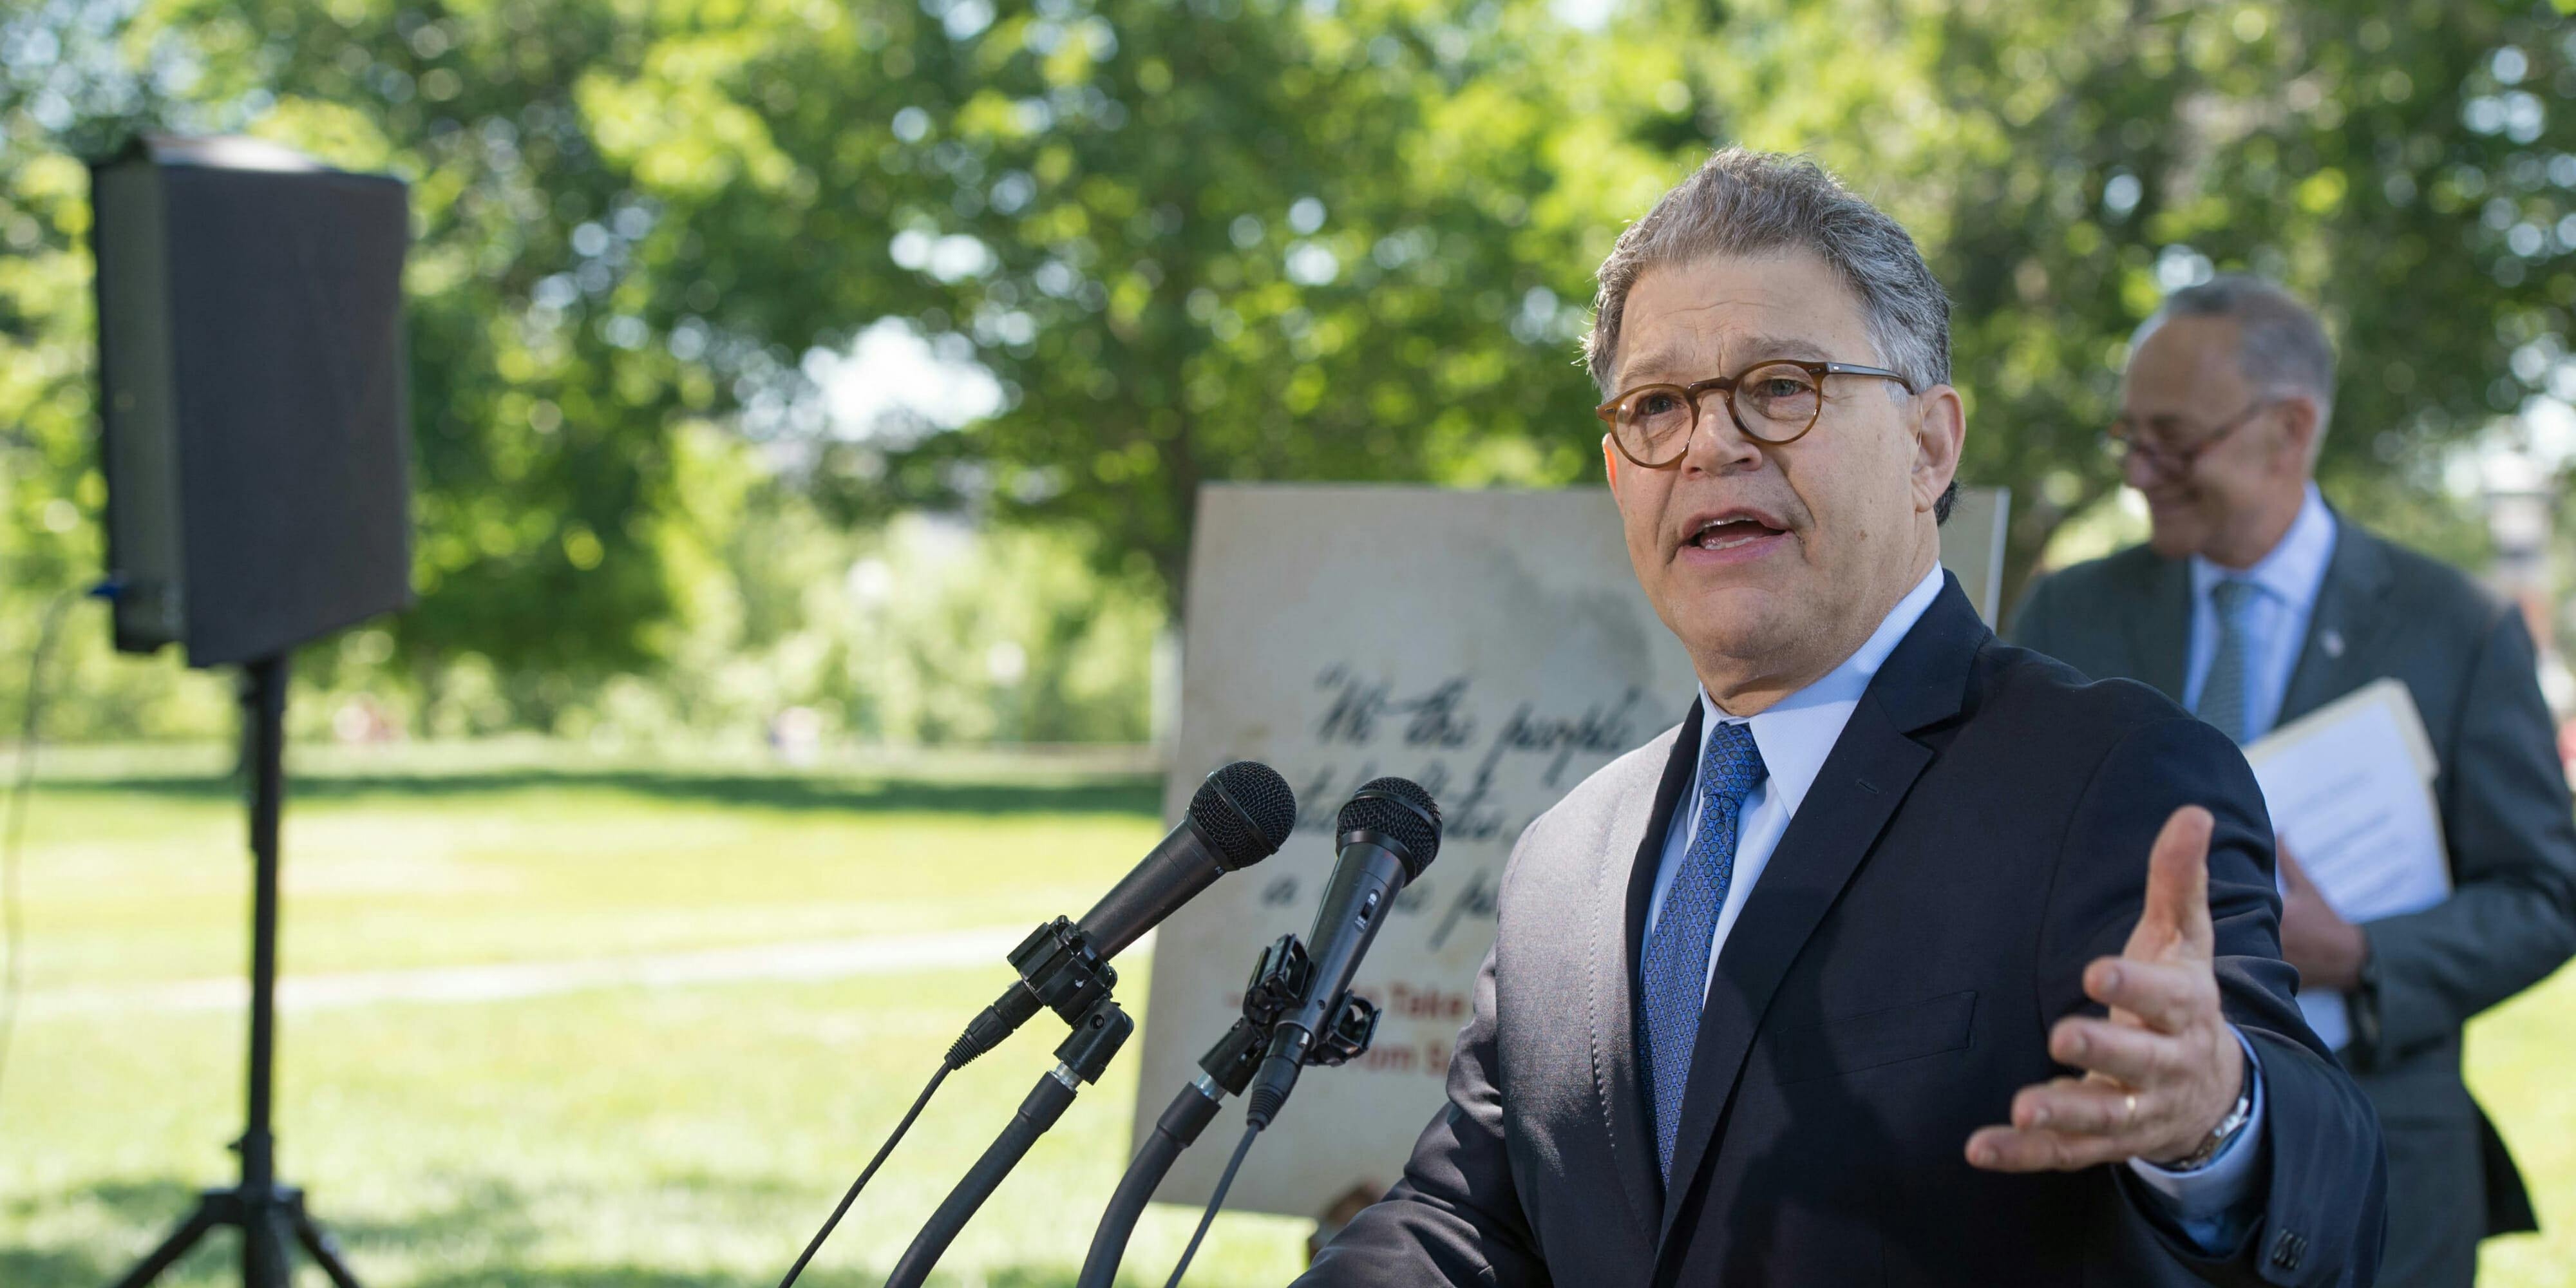 Female senators called on Al Franken to resign from office amid sexual misconduct claims.